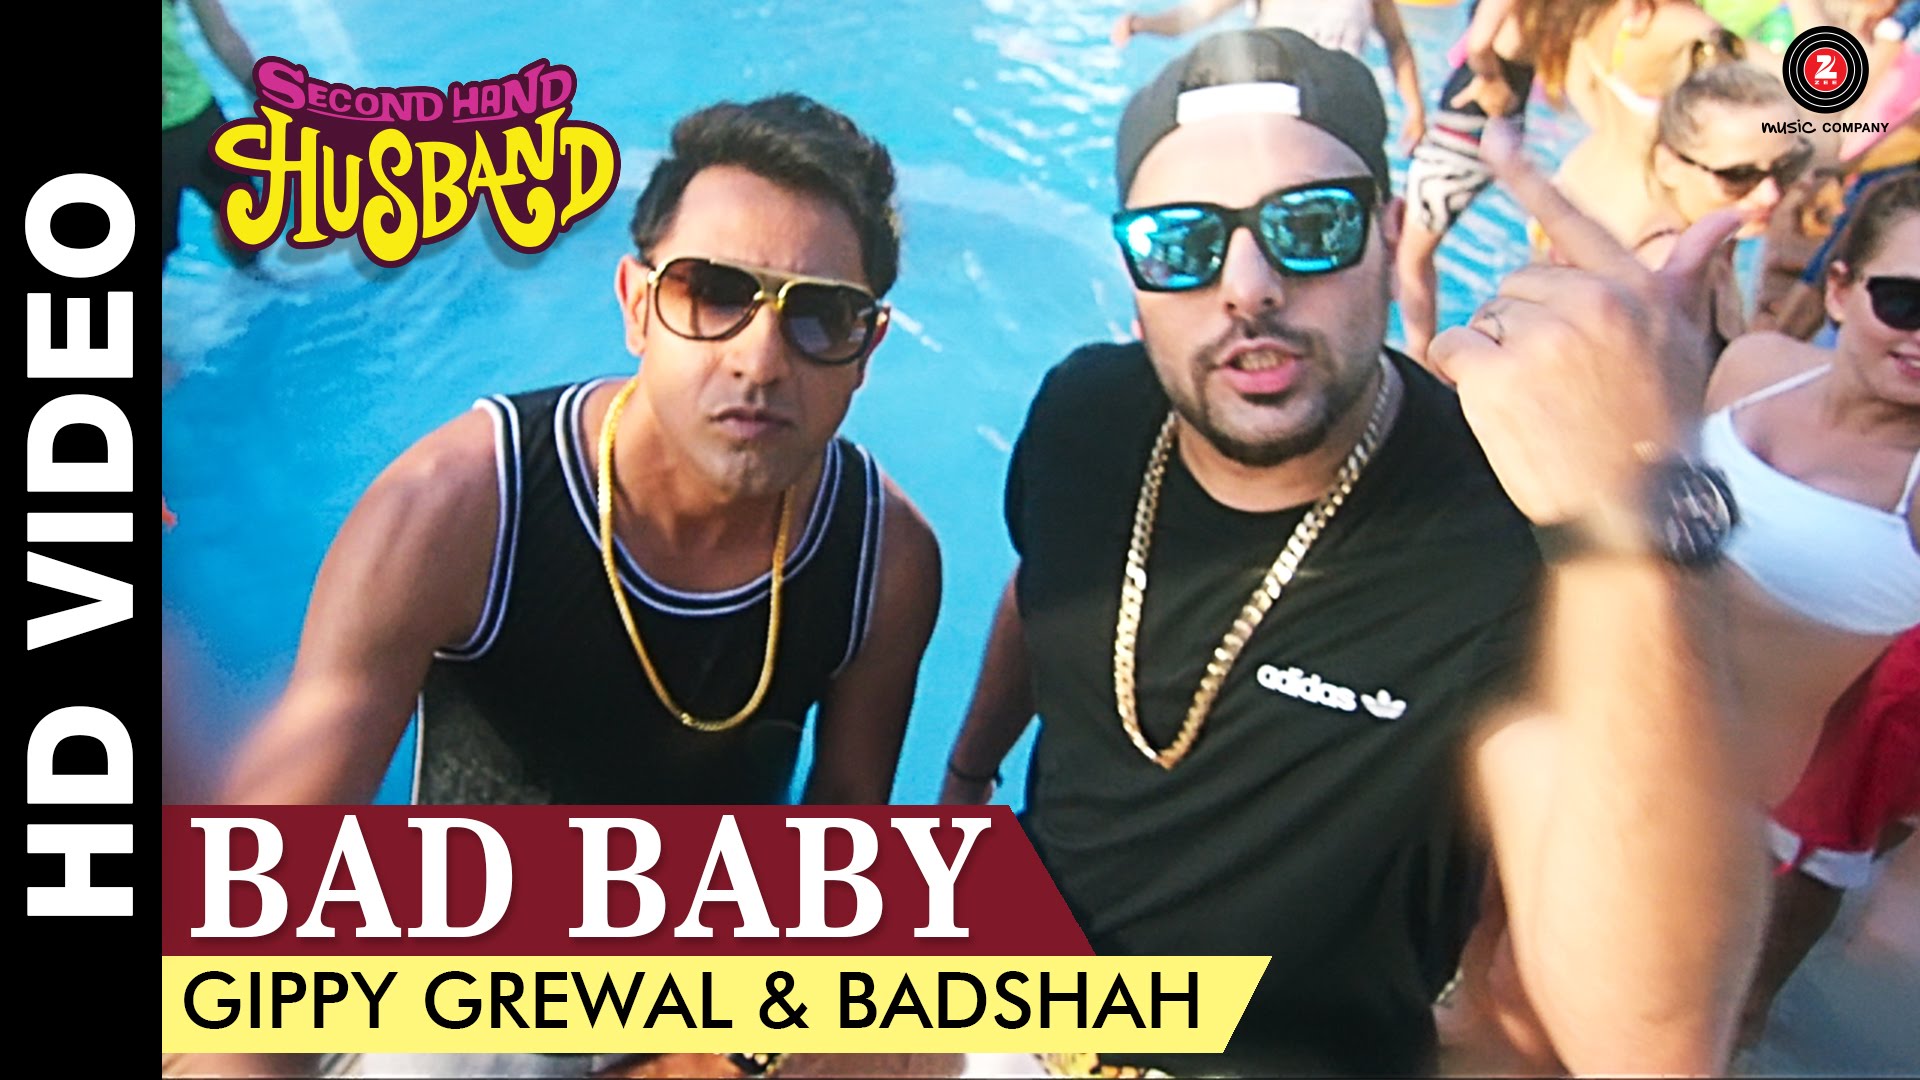 Bad Baby song from 'Second Hand Husband'